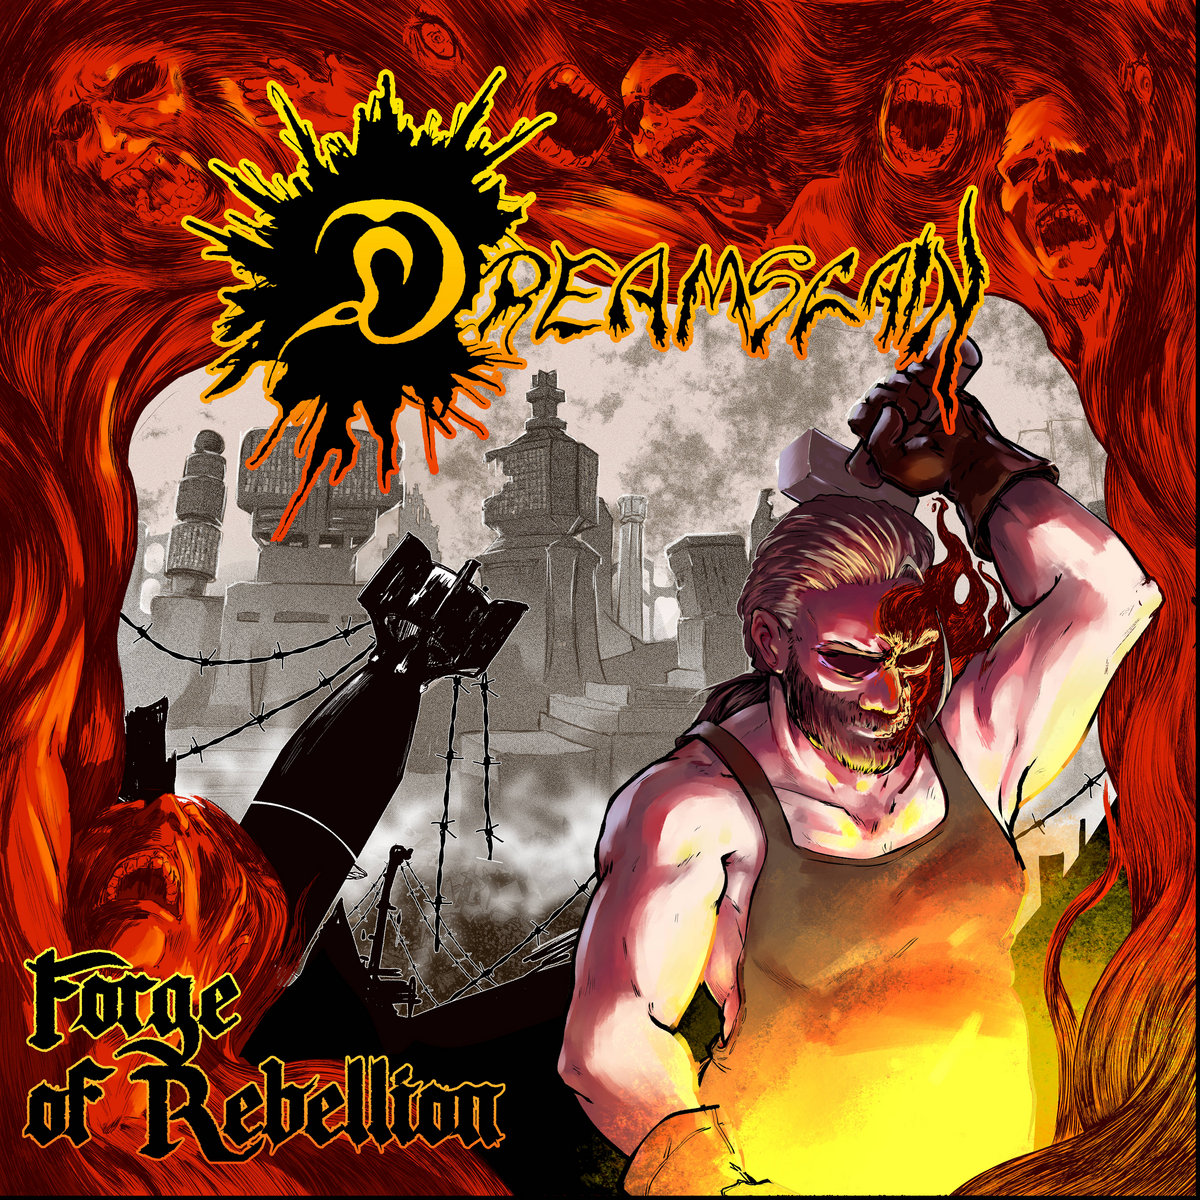 ALBUM REVIEW: Forge of Rebellion by Dreamslain